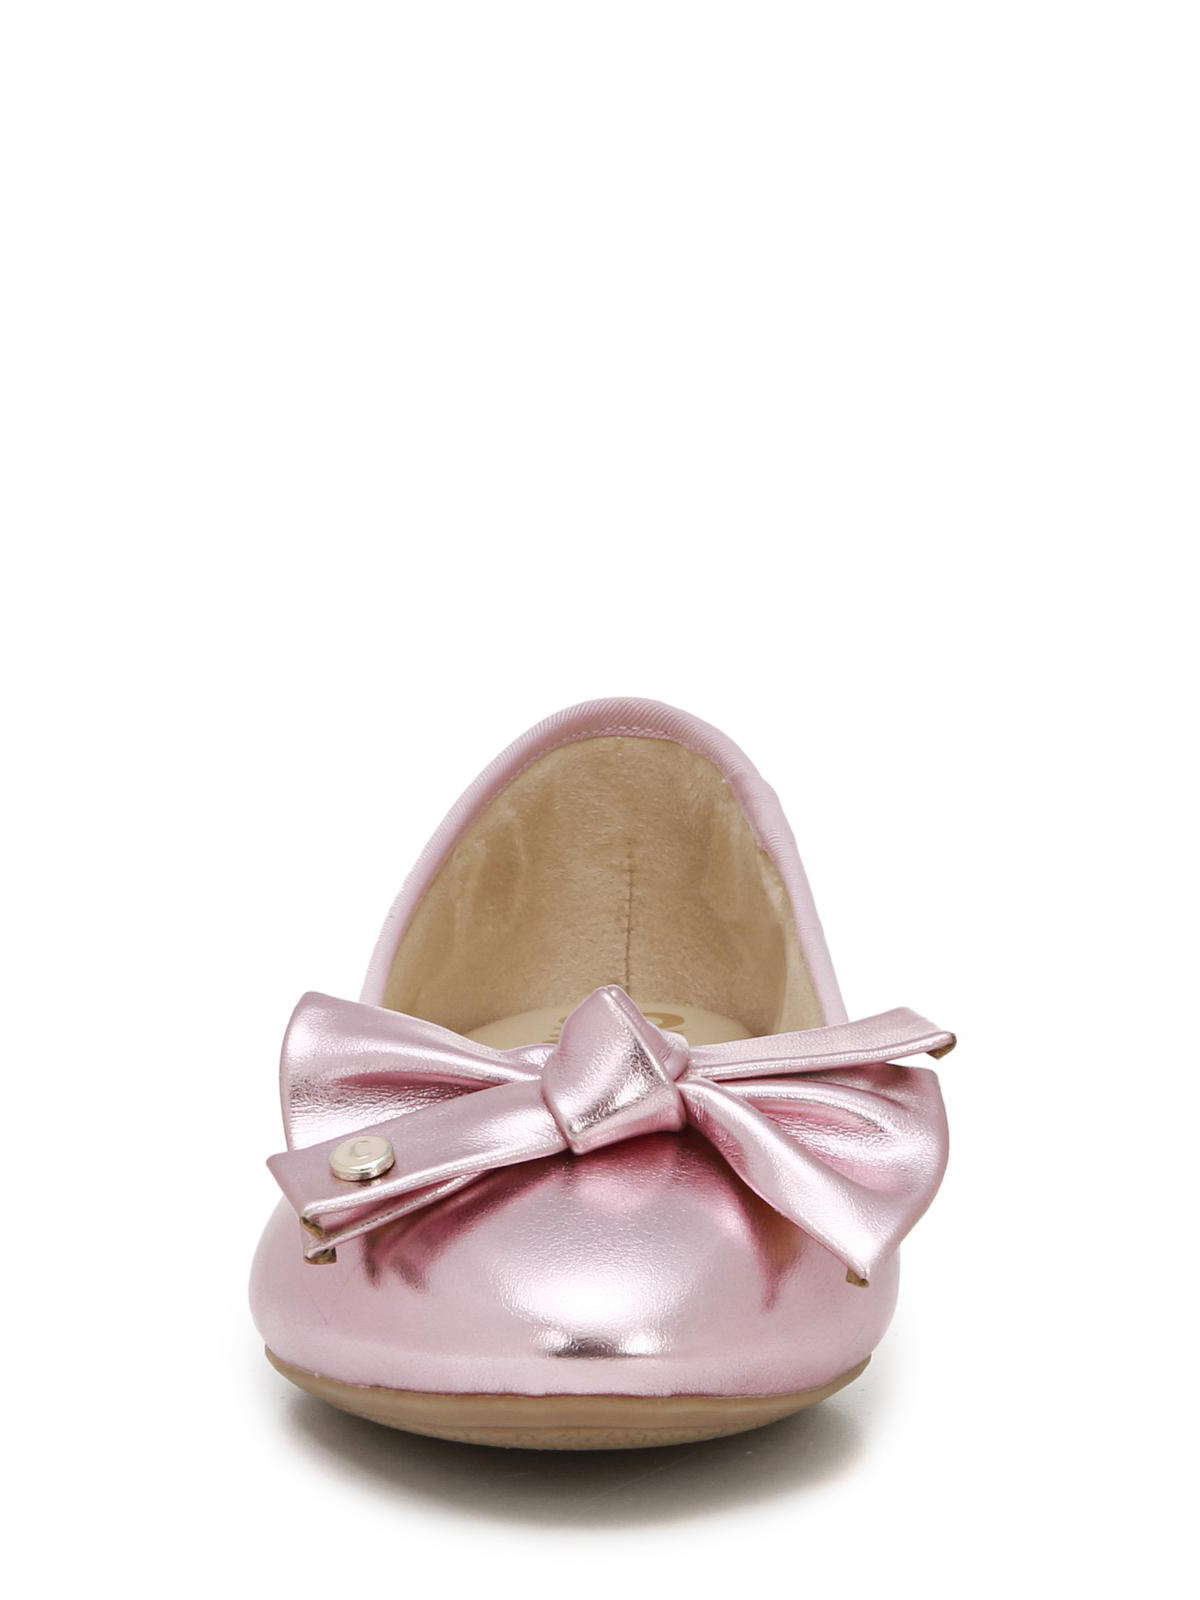 Circus by Sam Edelman Women's Connie Ballet Flat - image 2 of 8